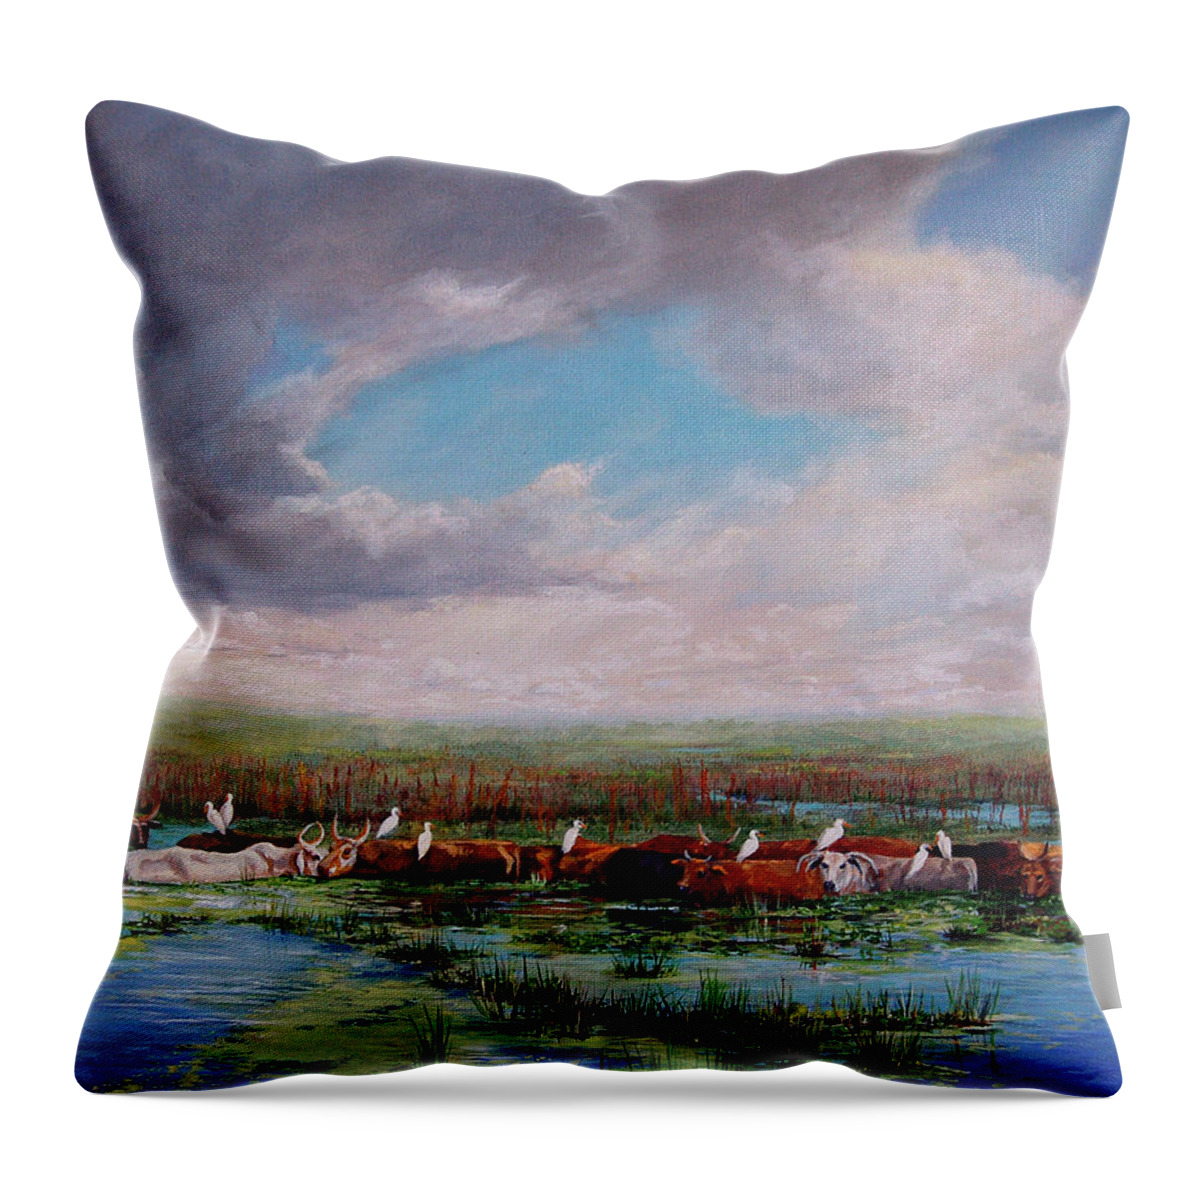 Landscape Throw Pillow featuring the painting St. John's Cows I by AnnaJo Vahle